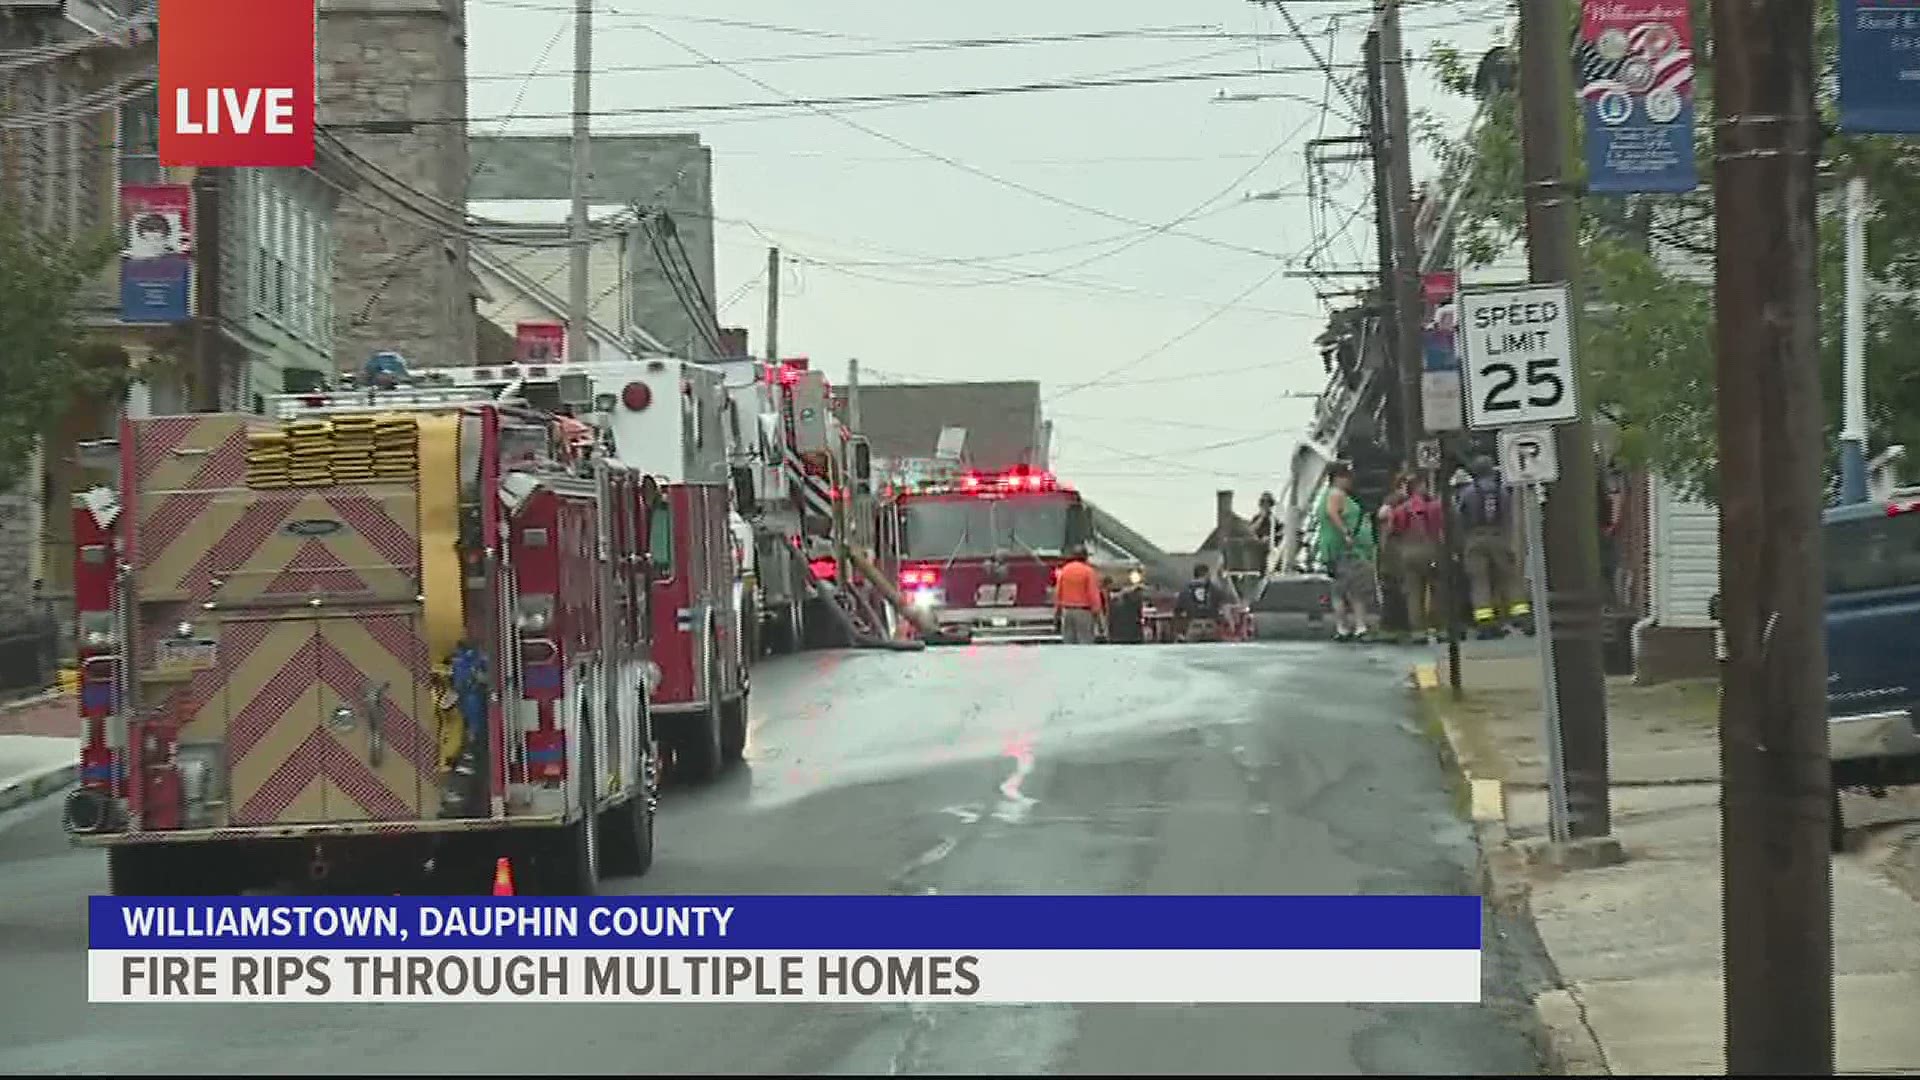 Fire Rips Through Multiple Homes in Dauphin County. More information is developing.